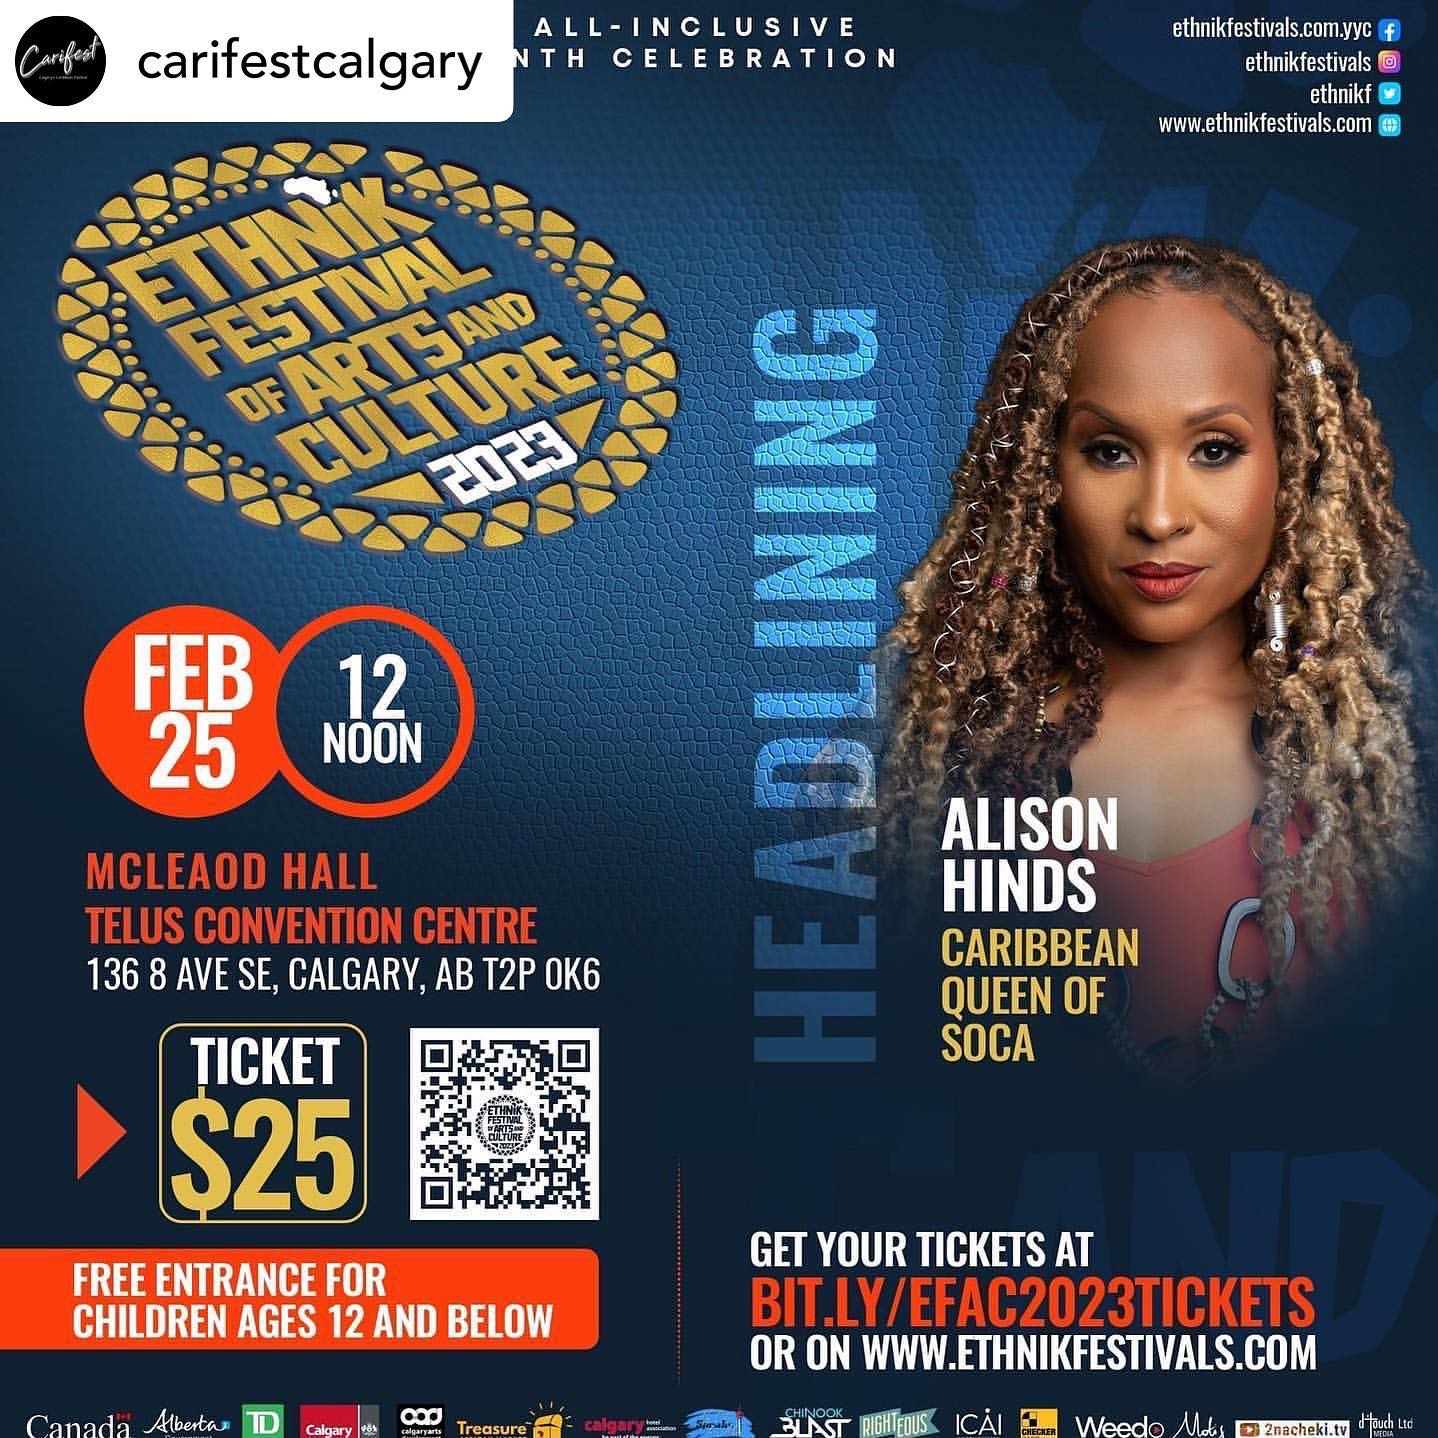 • @carifestcalgary THE QUEEN IS COMING TO #YYC! 

• @ethnikfestivals Queen of SOCA @alisonhinds live in @cityofcalgary Get your tickets >>https://lnkd.in/g4UQe95f
FREE ADMISSION for Children ages 12 and below.
For sponsorship,>> info@ethnikfestivals.com @calgaryevents @calgaryafterschool @tourismcalgary @calgaryherald @cultureyyc_ @carifestcalgary @calgaryfolkfest @calgaryhumane @alberta_music @albertamusiccities